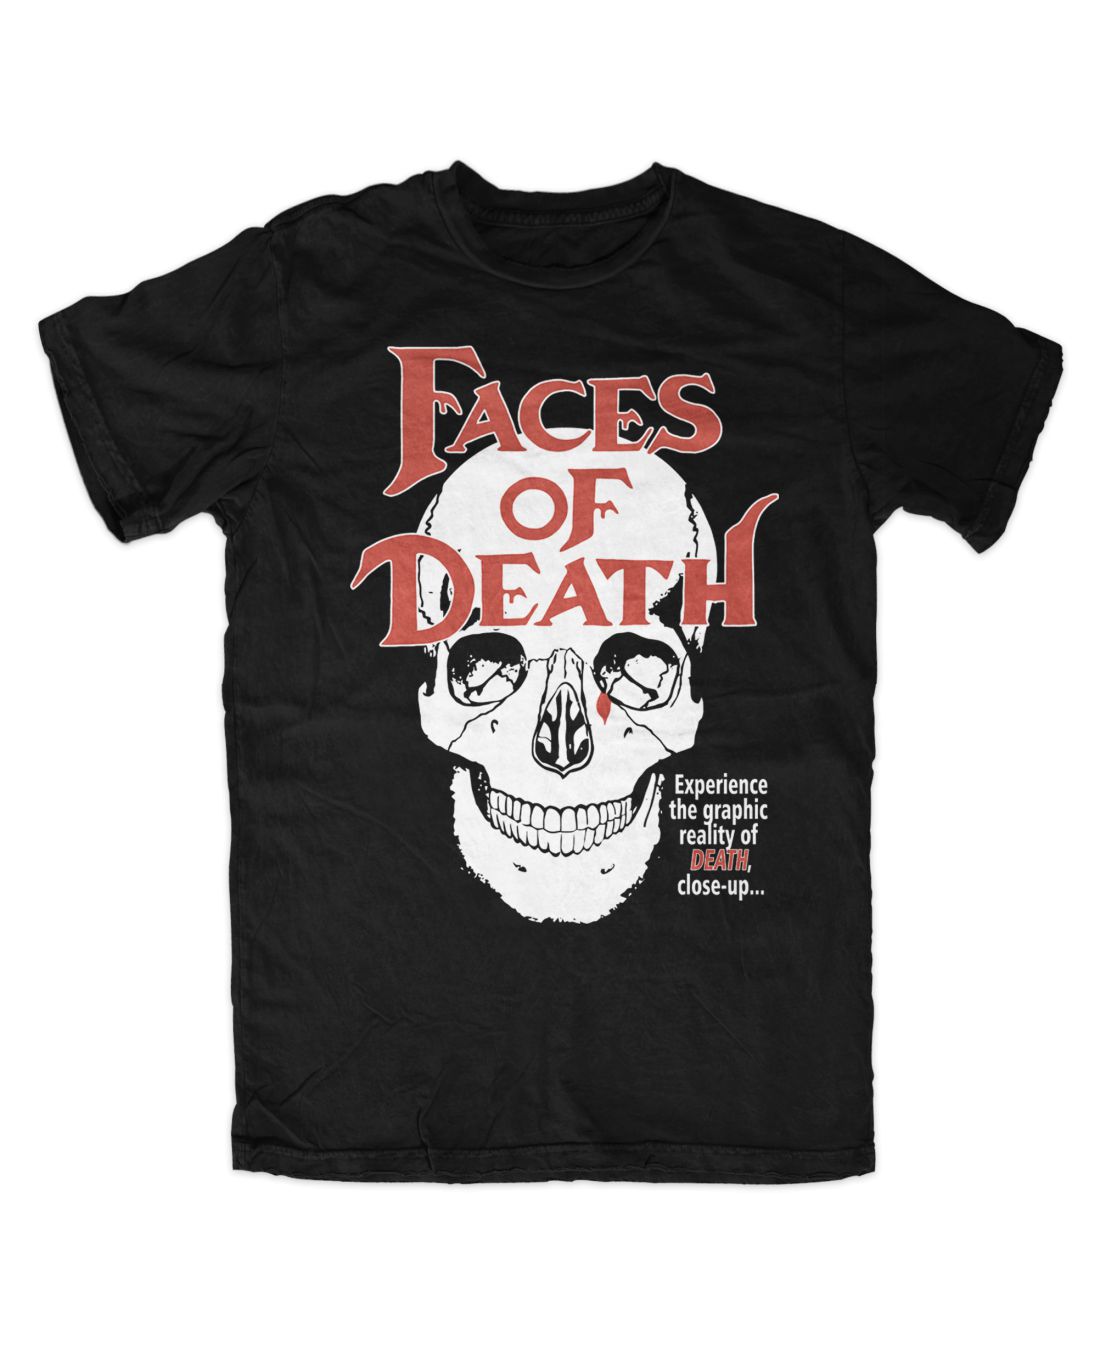 Faces Of Death 001